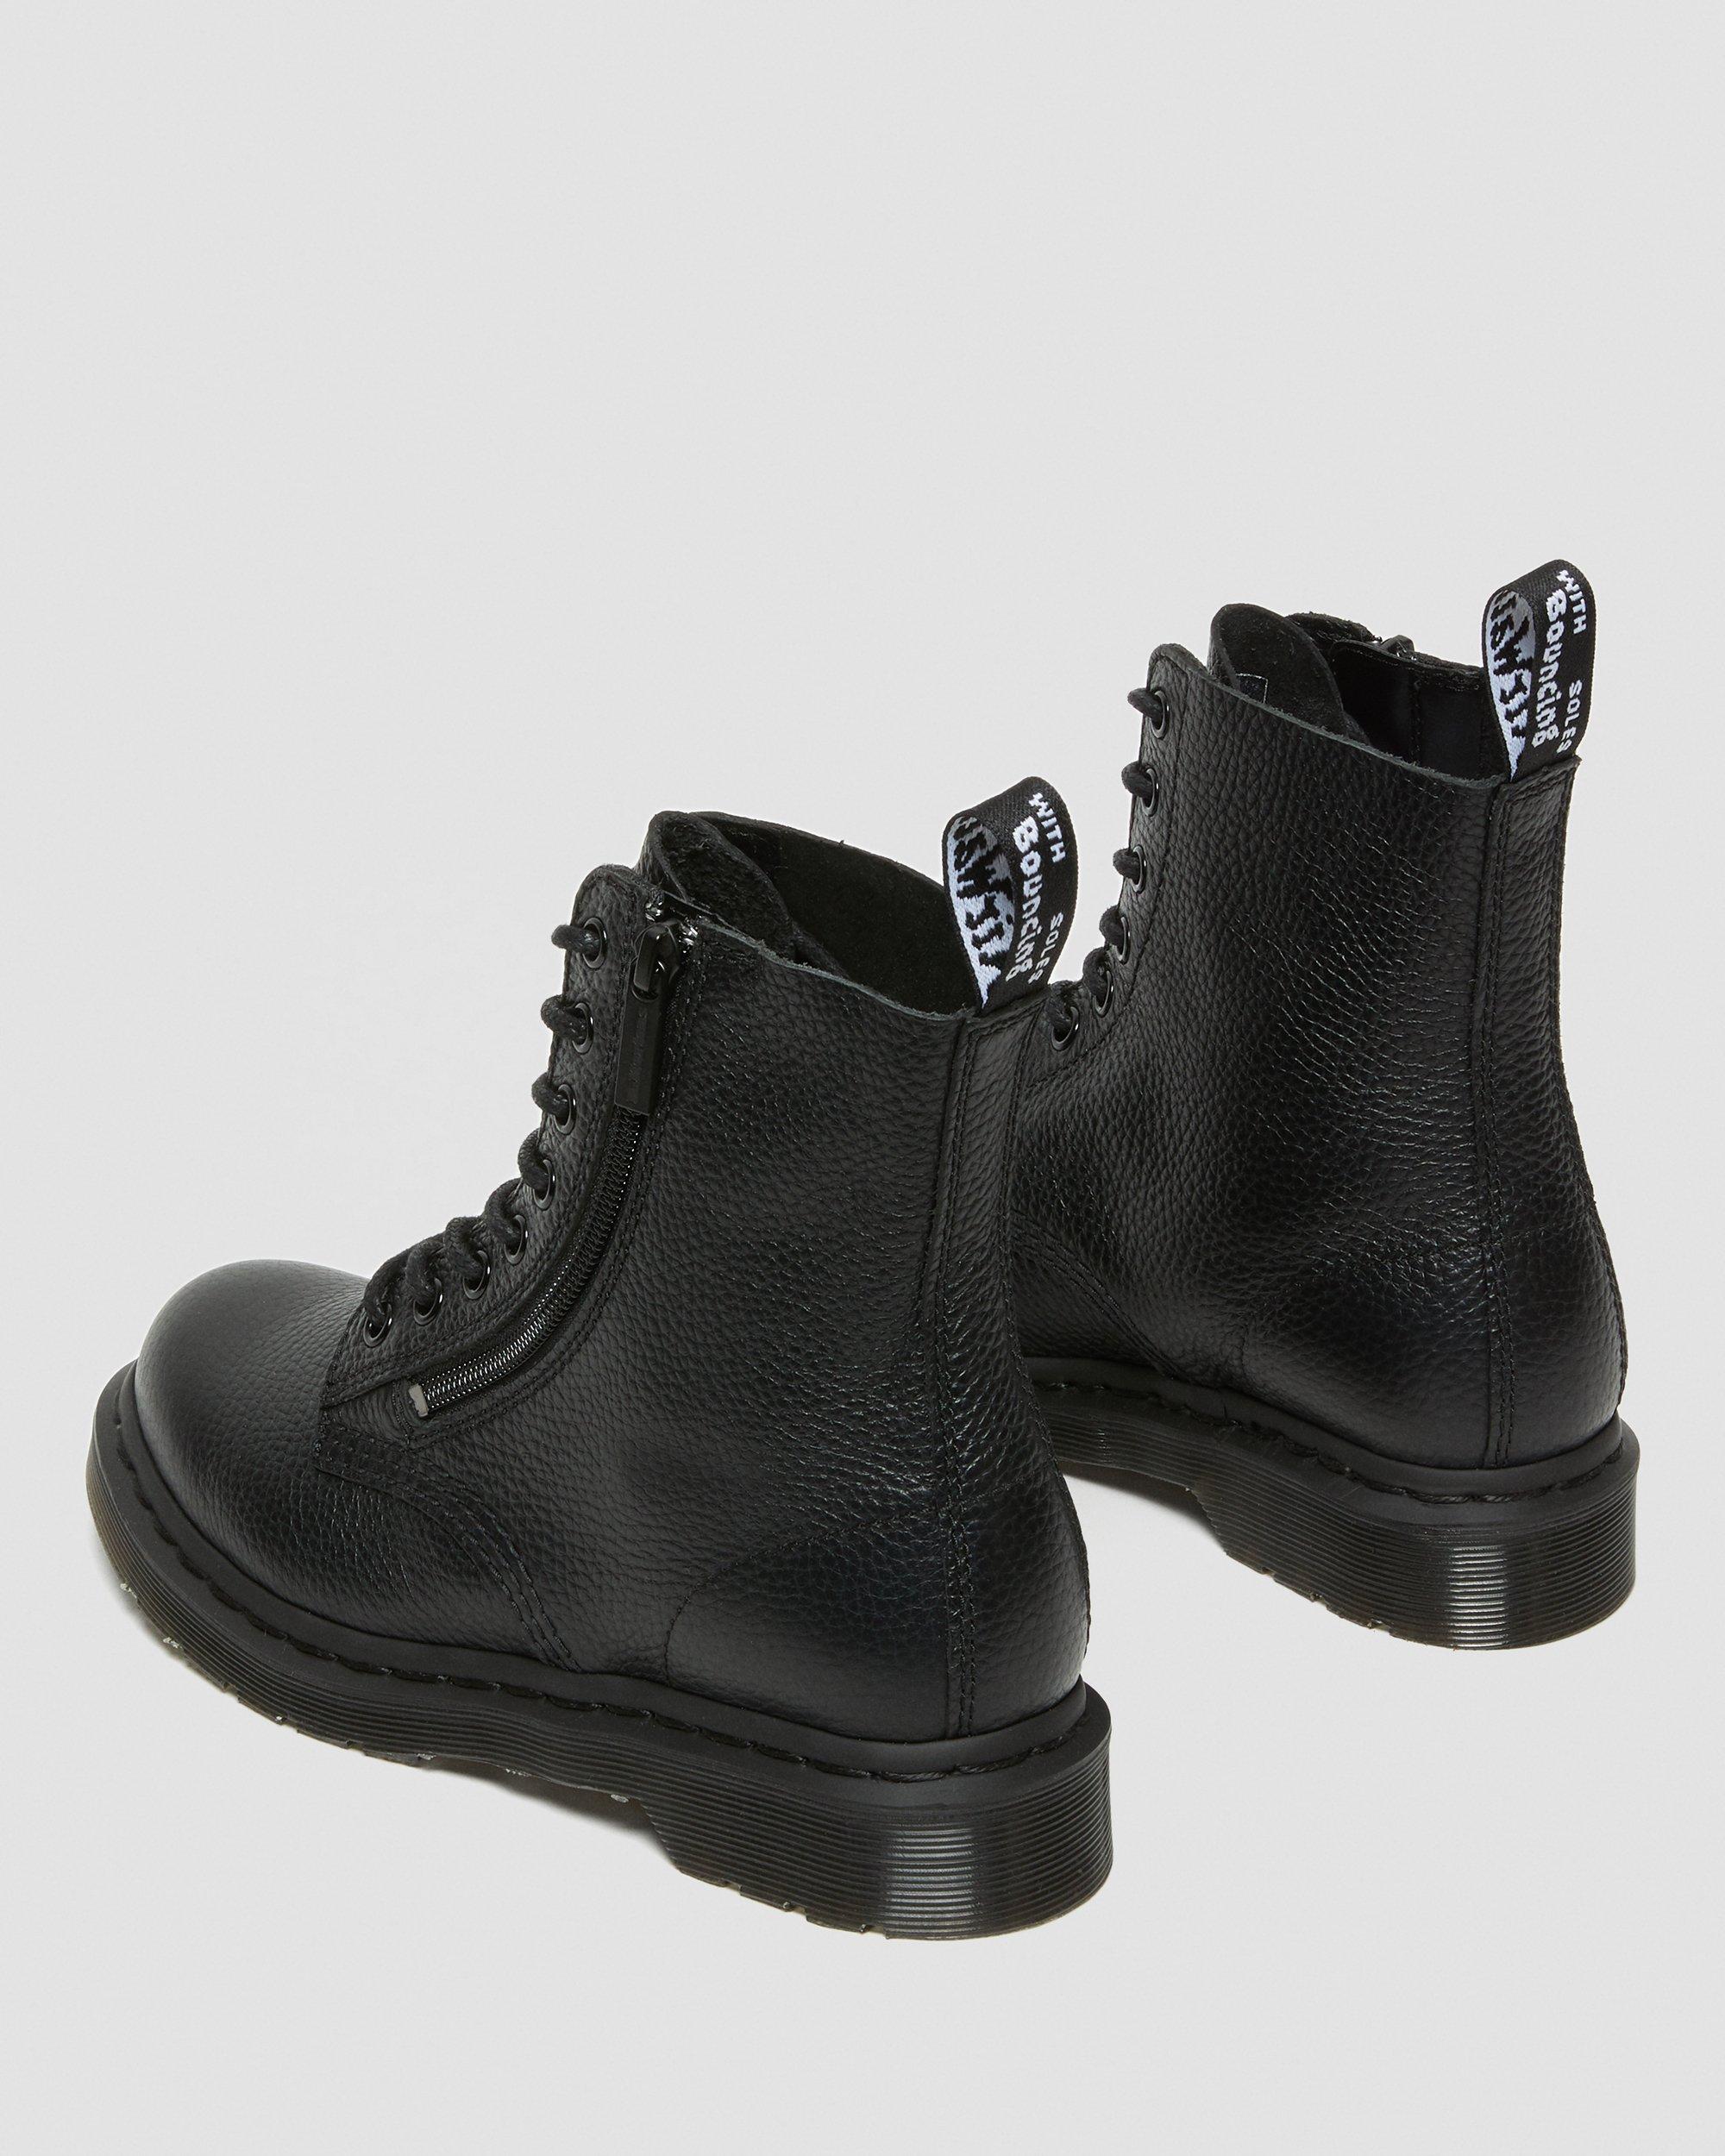 Postbote Ausblick Gehört dr martens pascal 8 eye zip boot System Patent ...